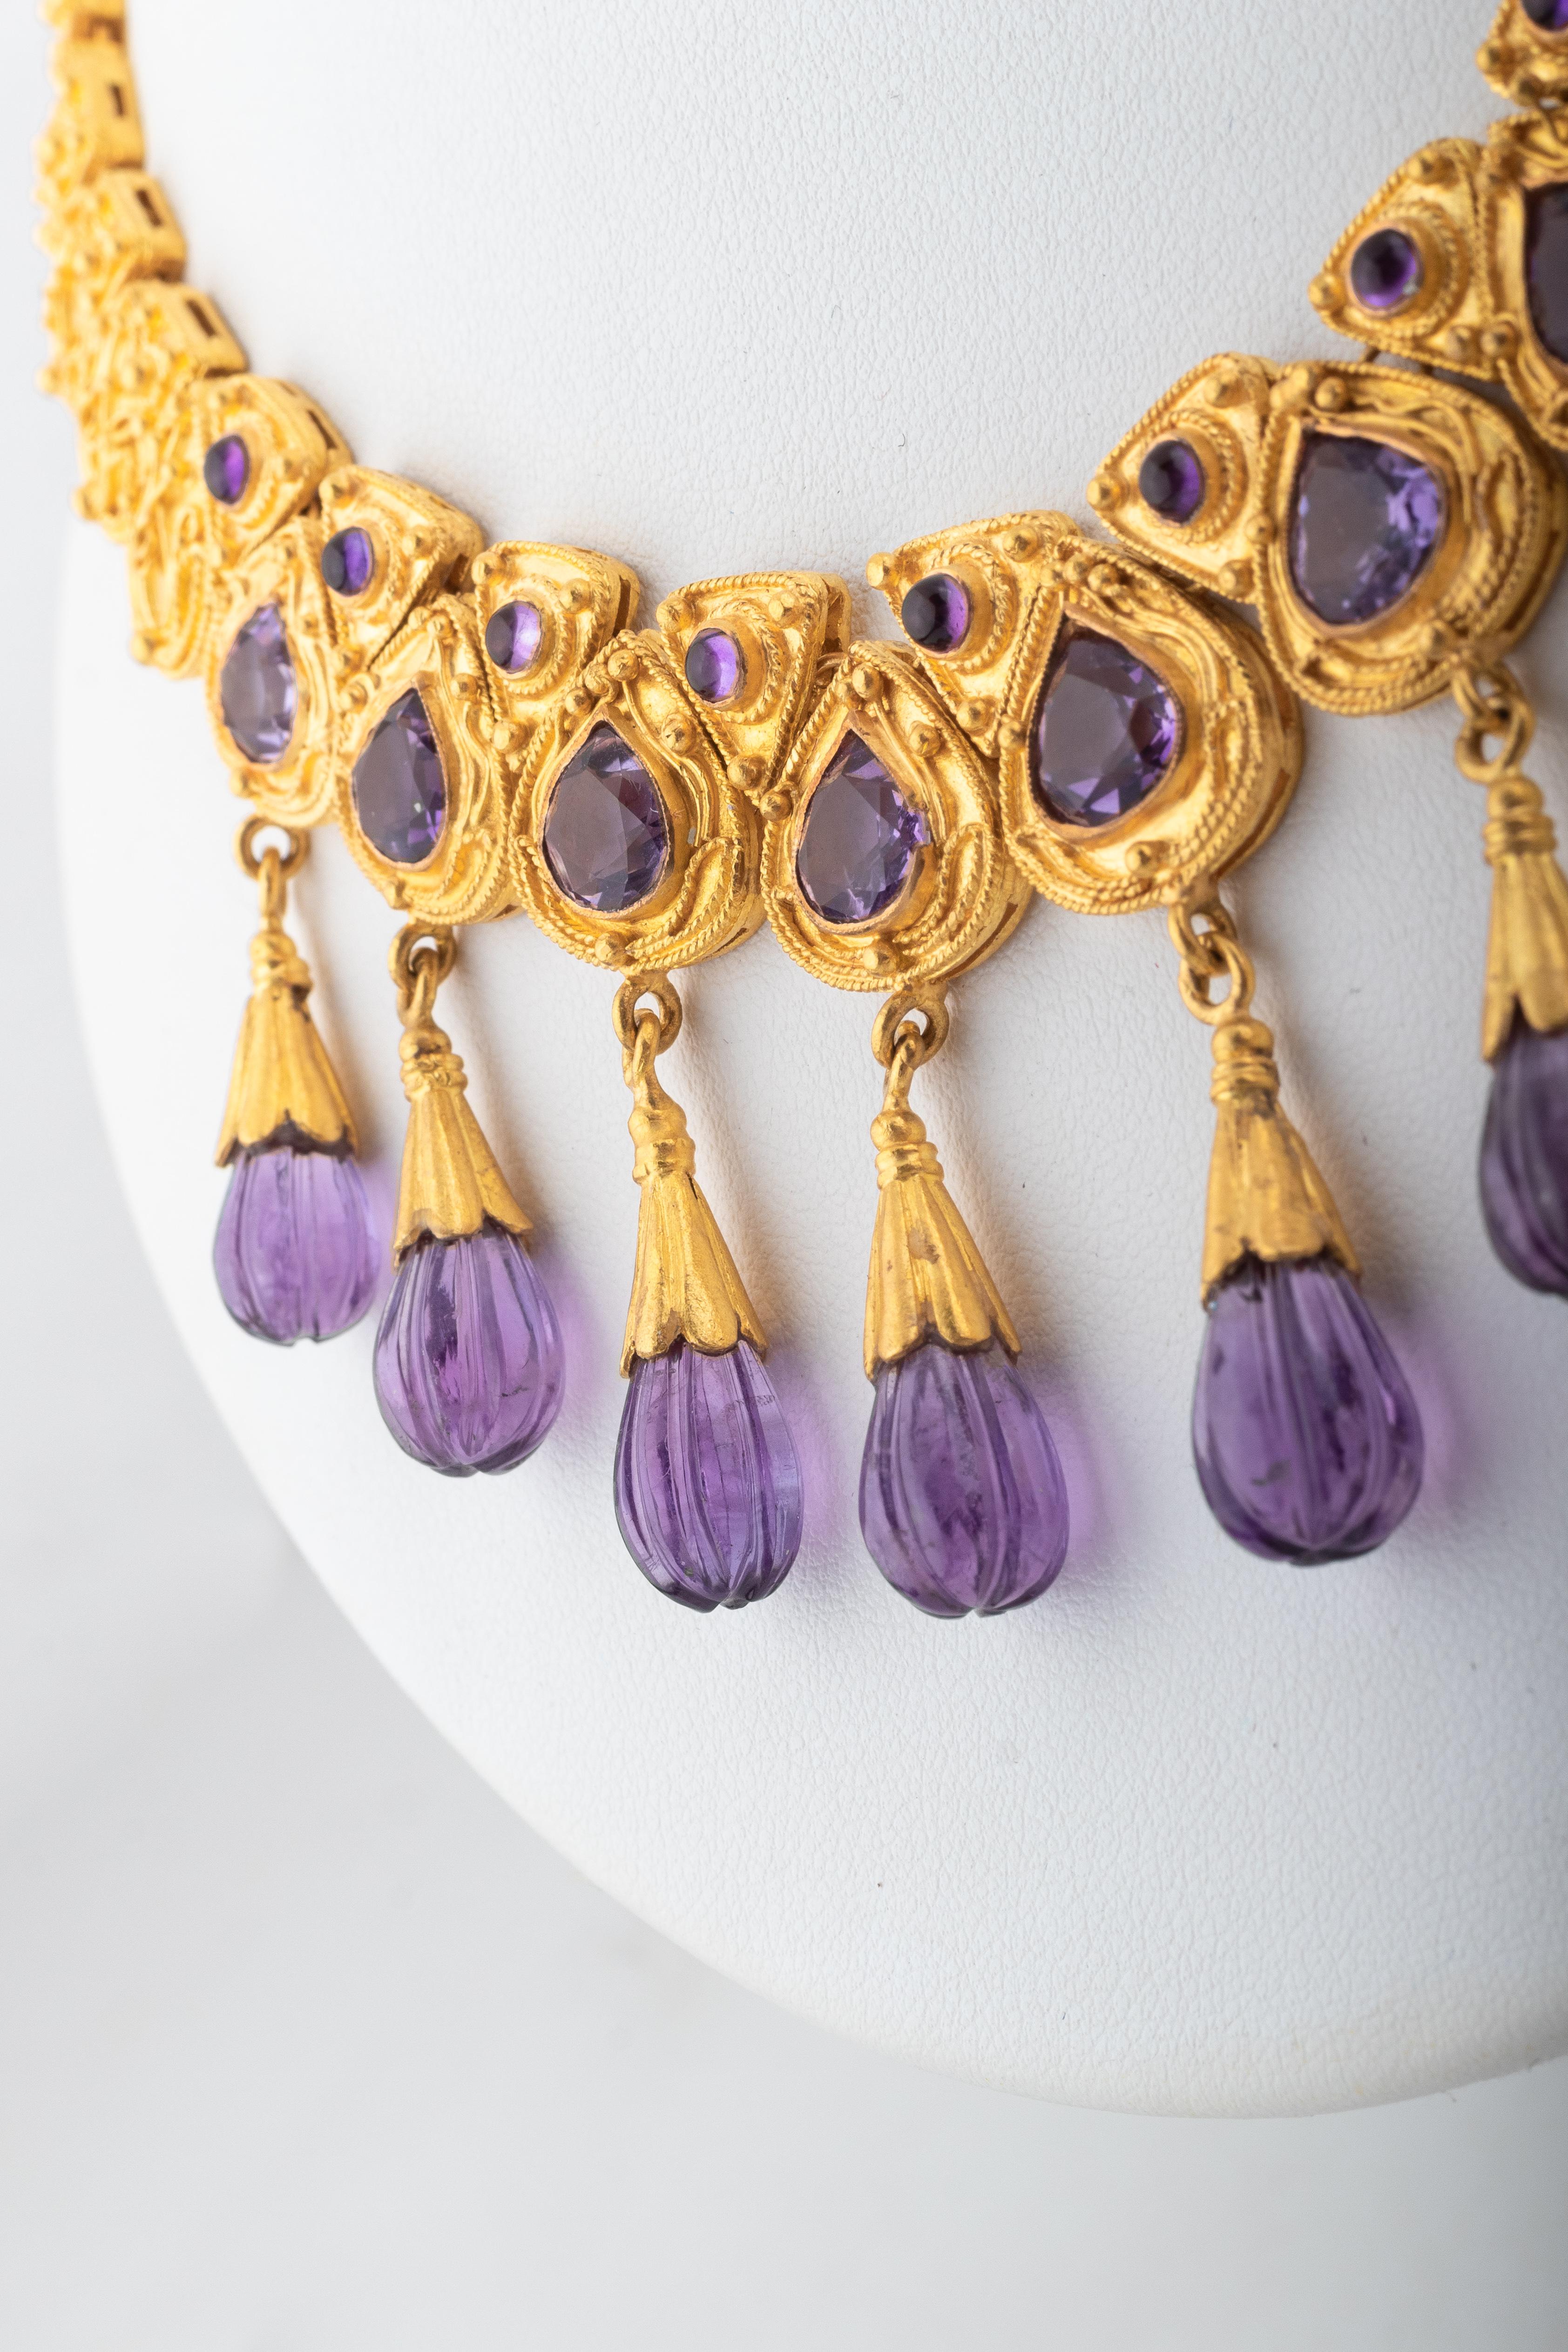 18 ct yellow gold
Set Amethyst drops
Length: 43 cm
Wide: 12 mm
Front Length: 4 cm
weight: 151,9 grams